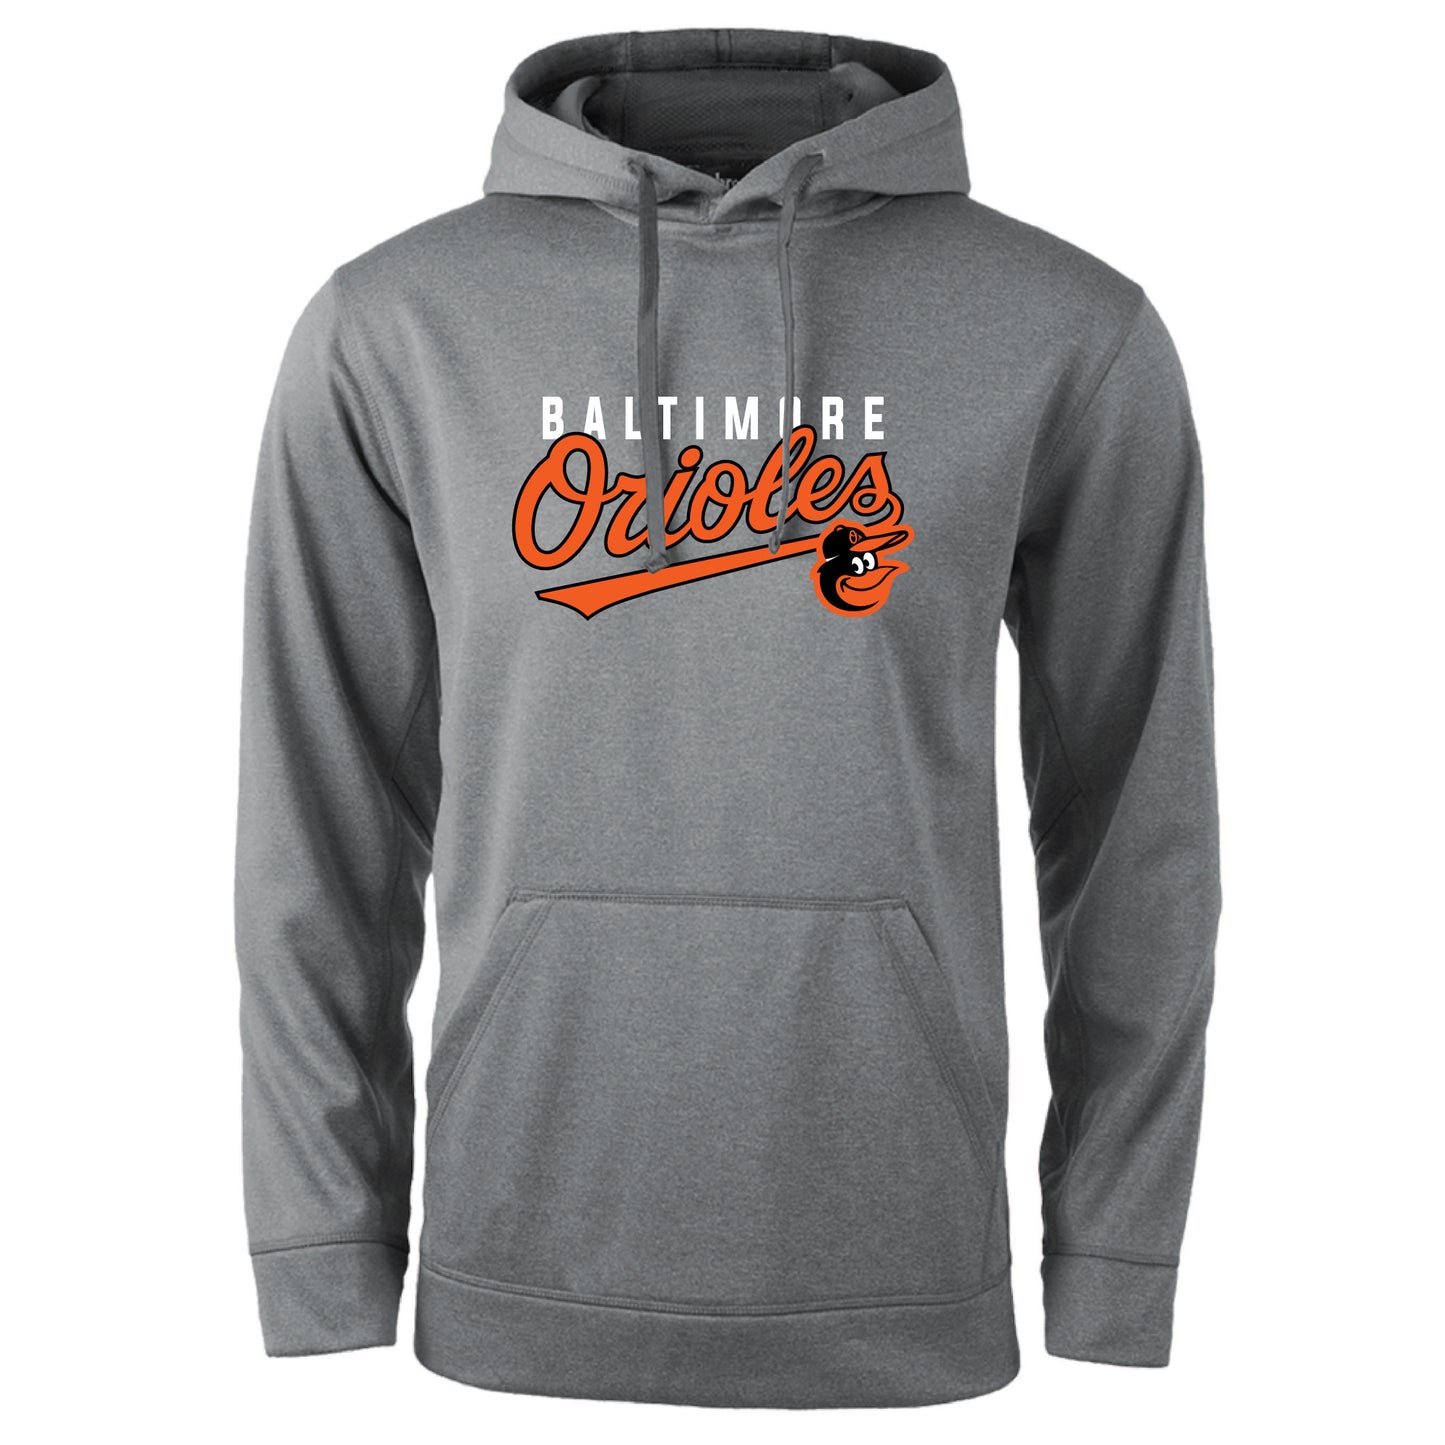 Baltimore Orioles Dunbrooke Champion Pullover Hoodie-Gray